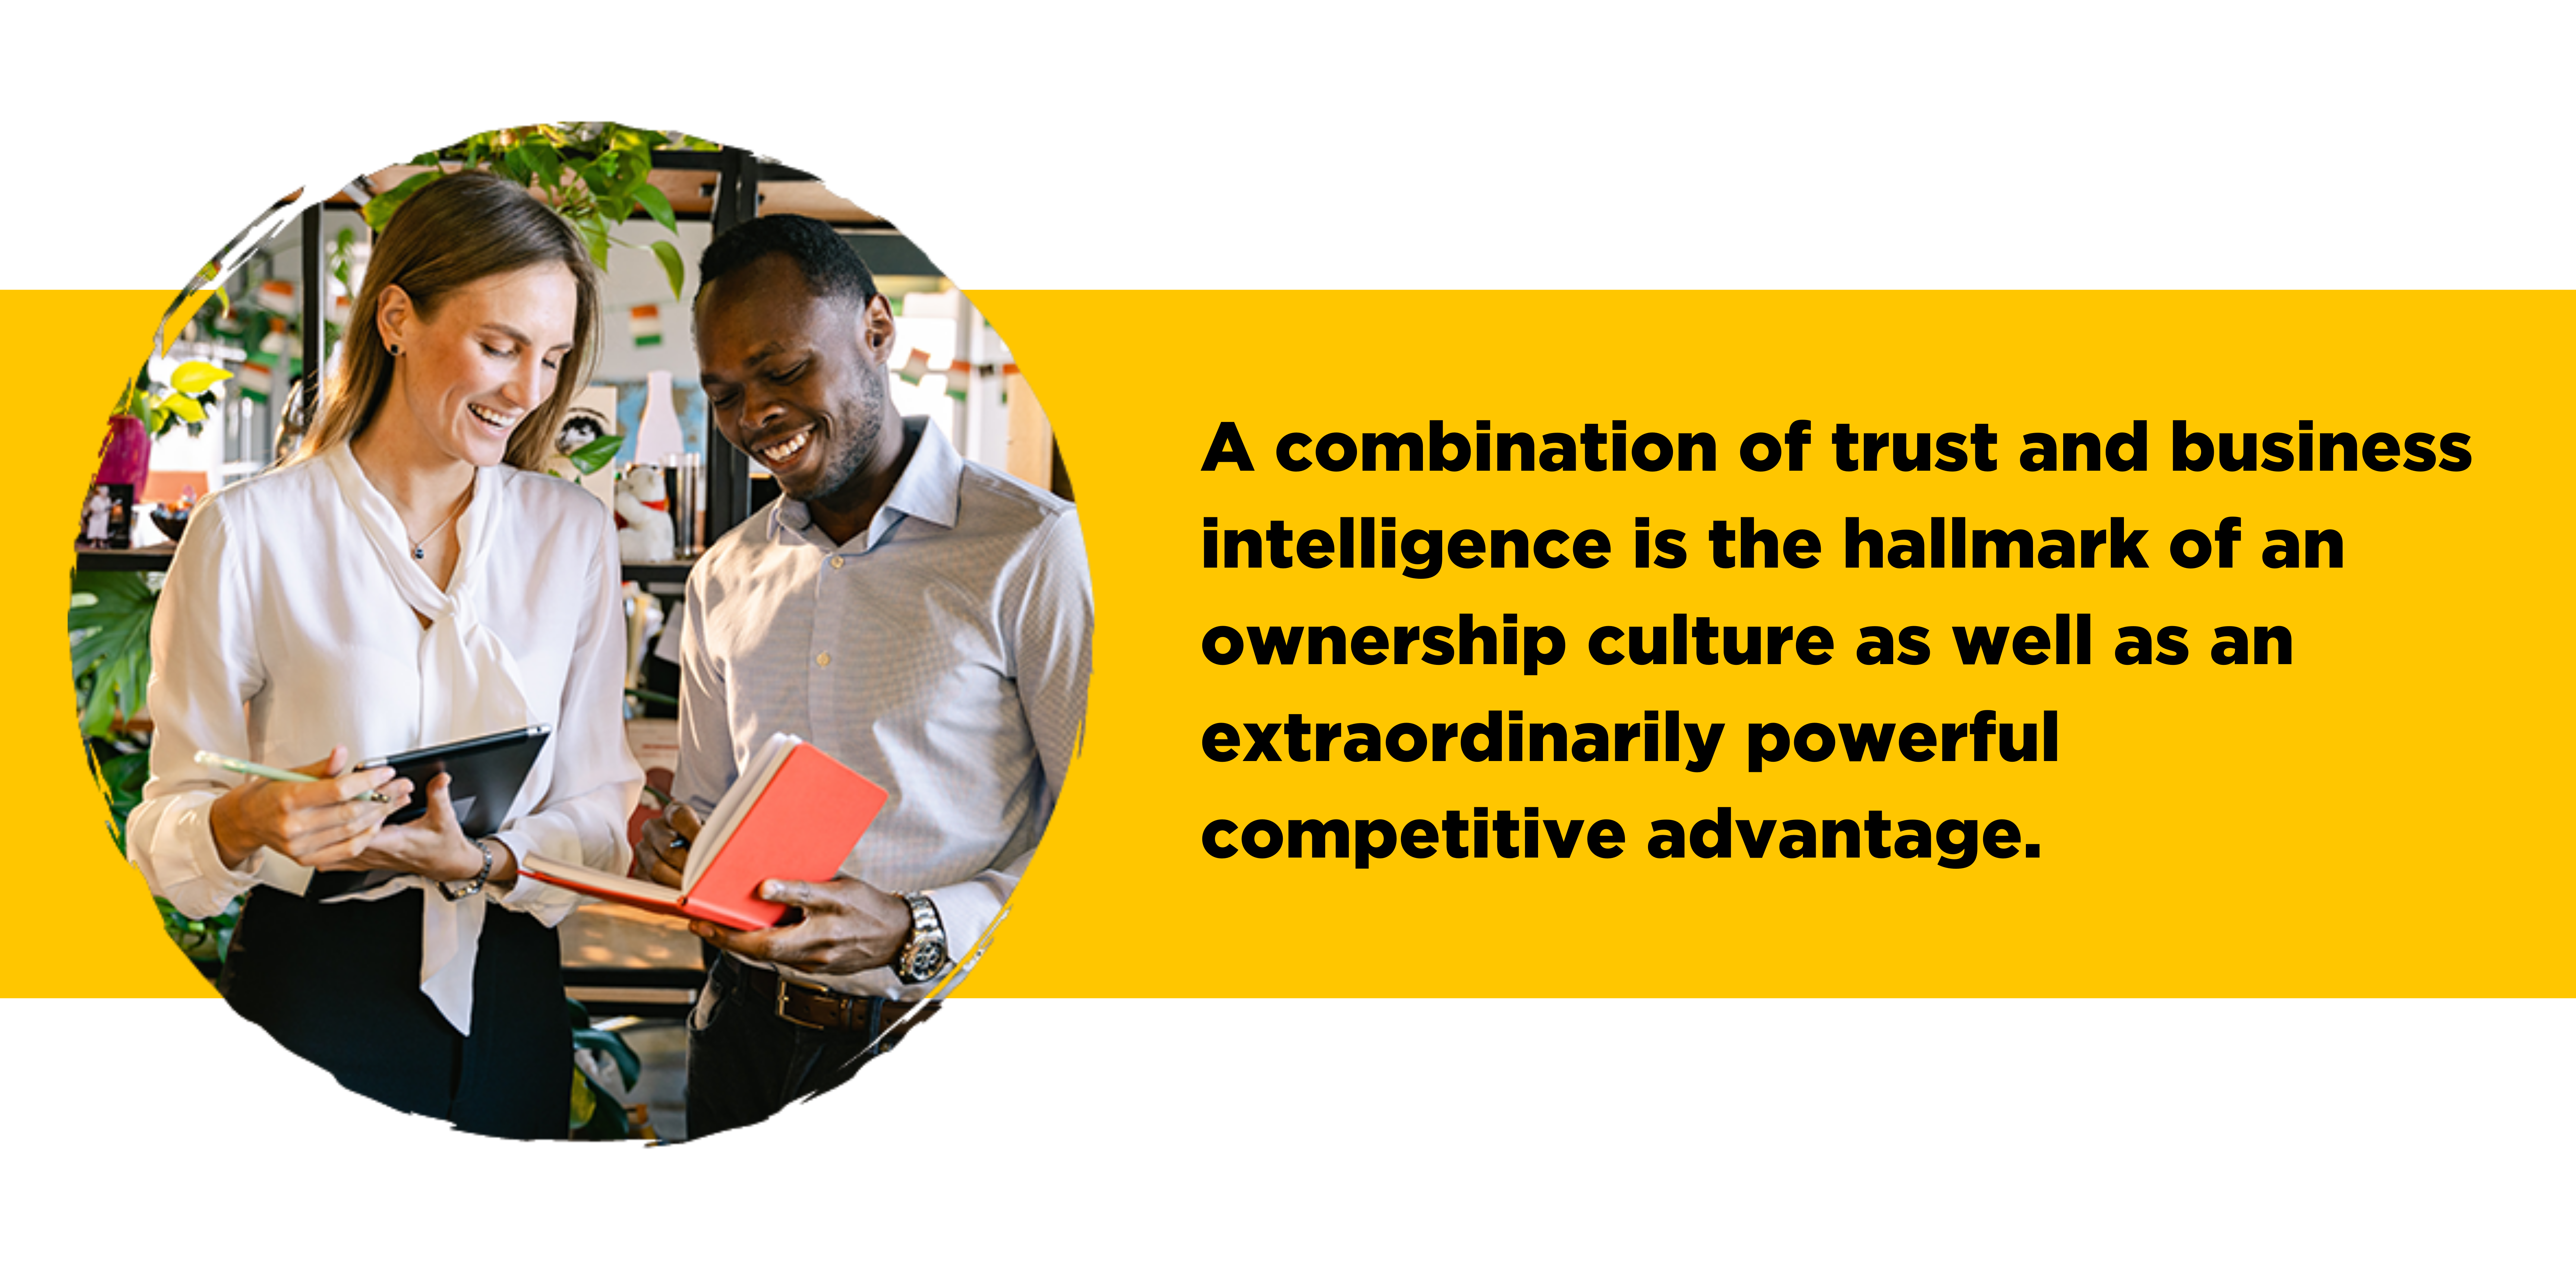 A combination of trust and business intelligence is the hallmark of an ownership culture as well as an extraordinarily powerful competitive advantage.